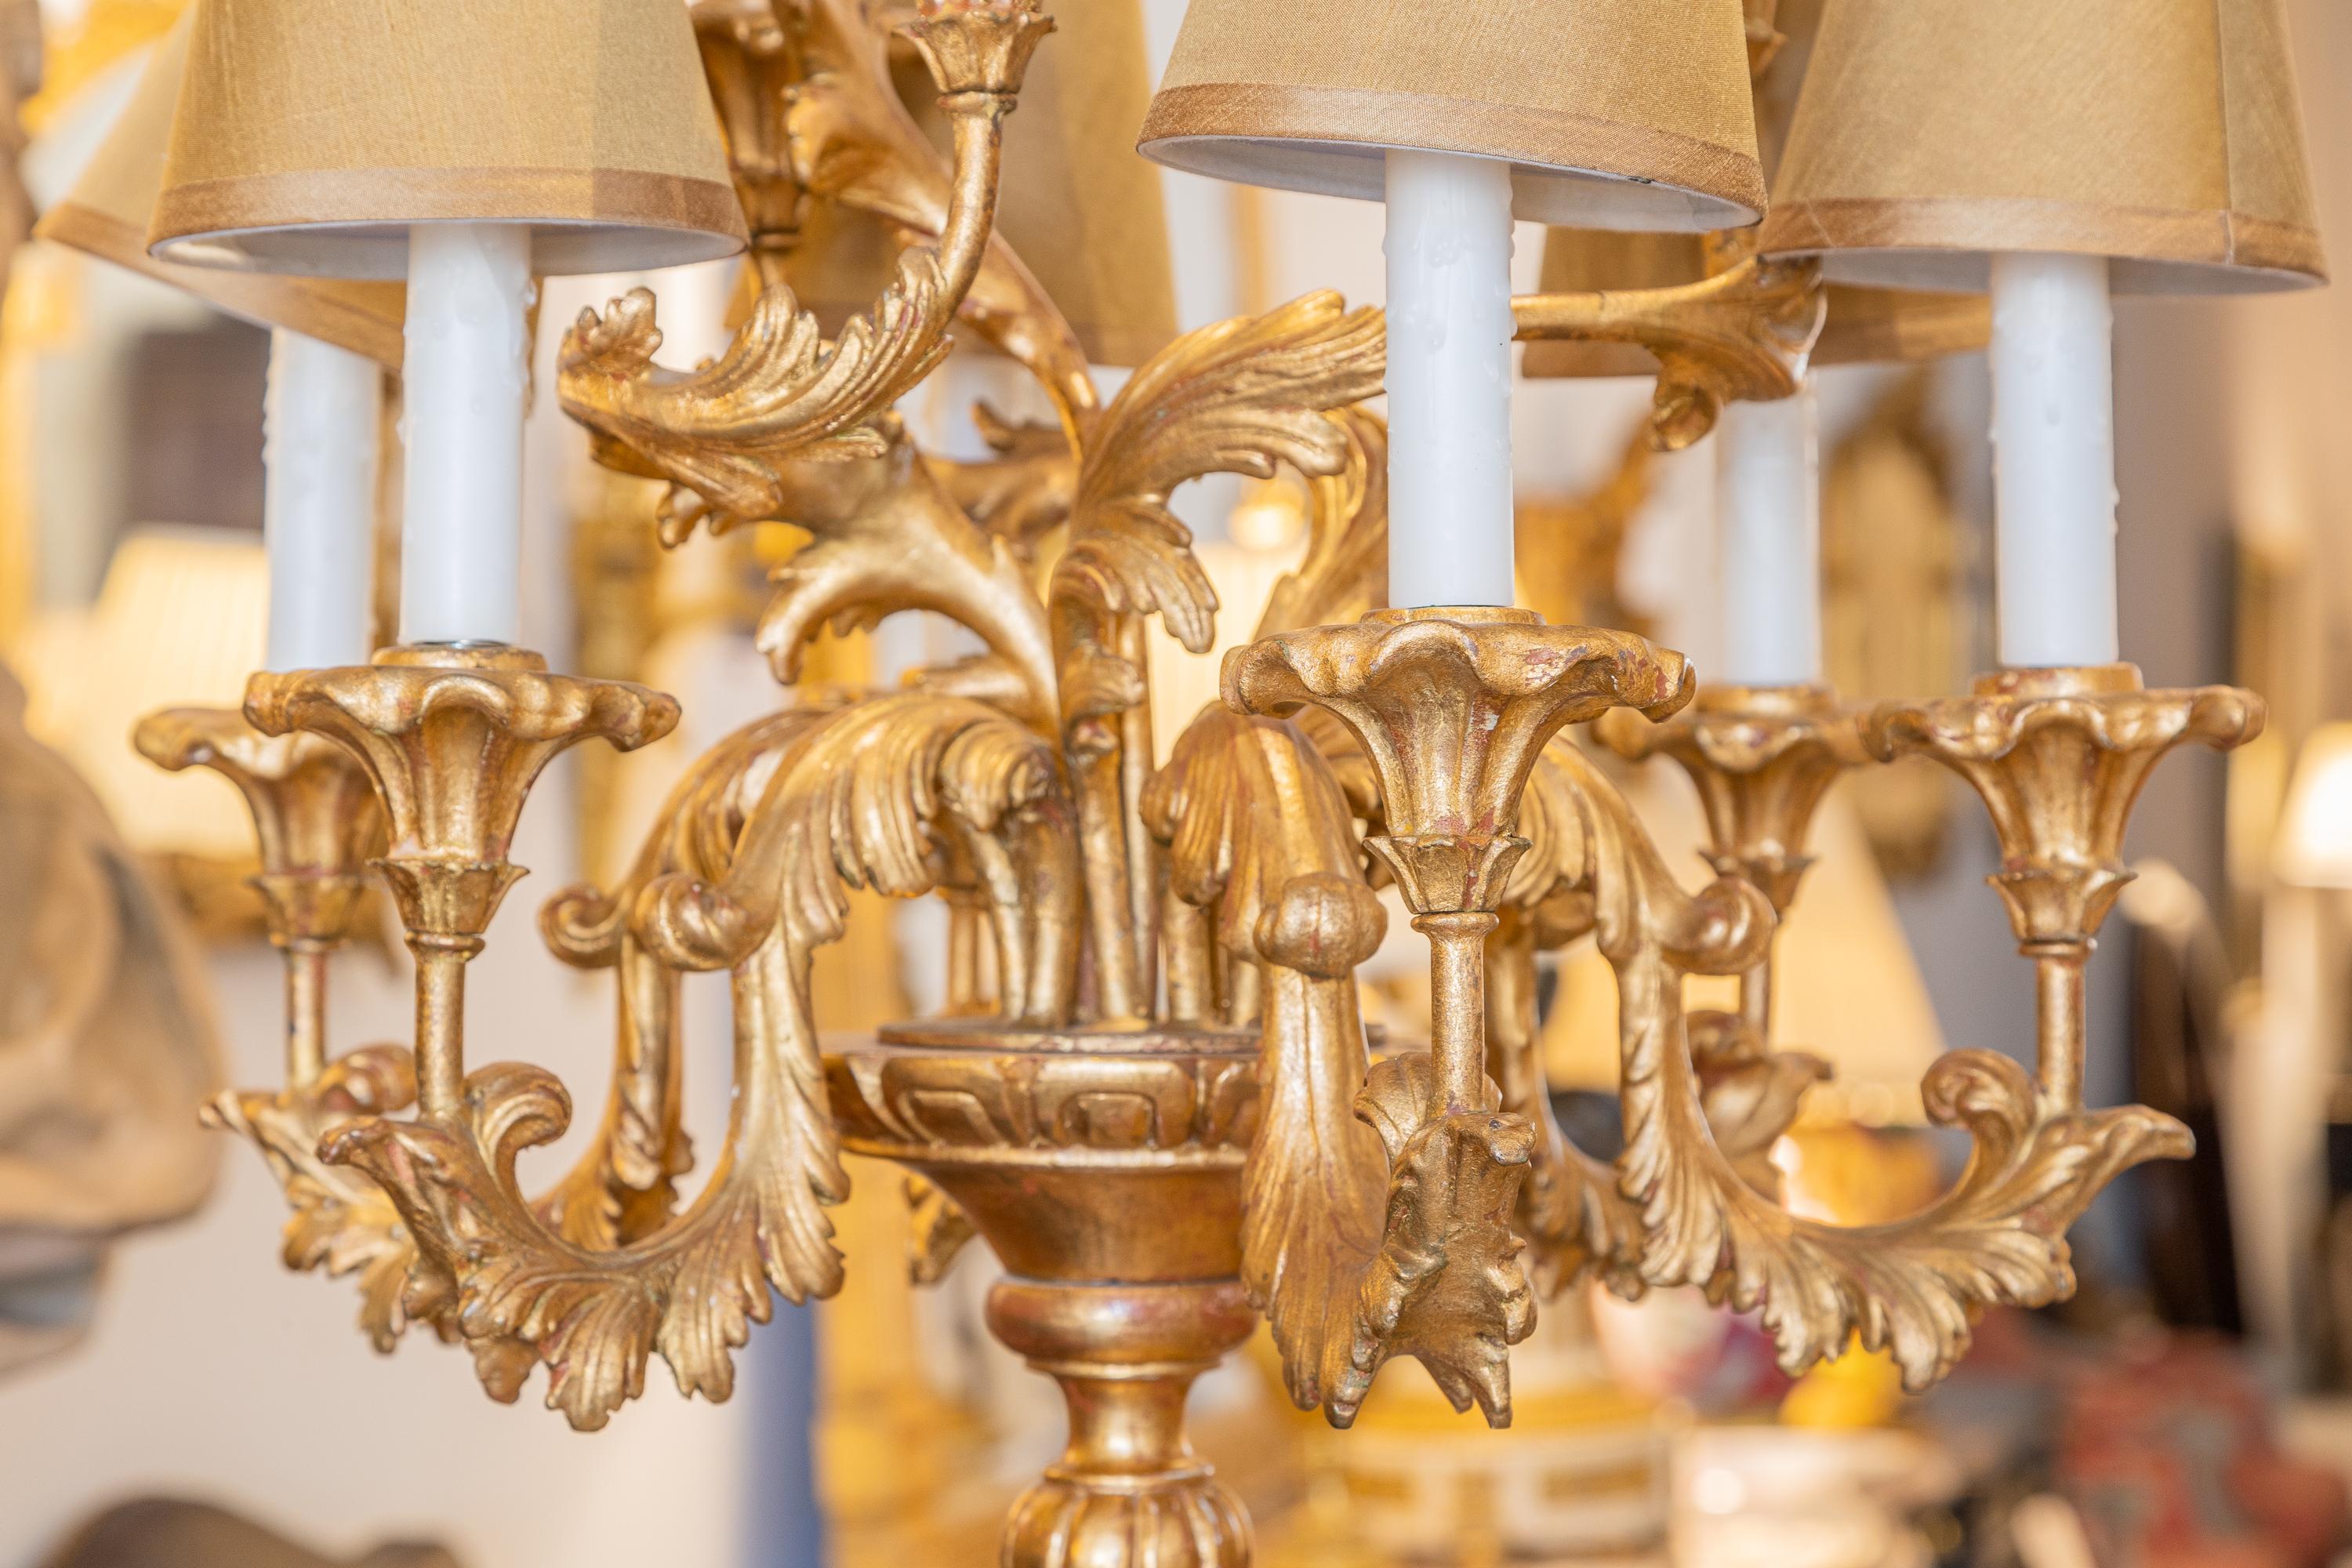 19th Century Fine Pair of Gilt Carved French Early 20th C Candelabra Floor Lamps 10 Lights For Sale